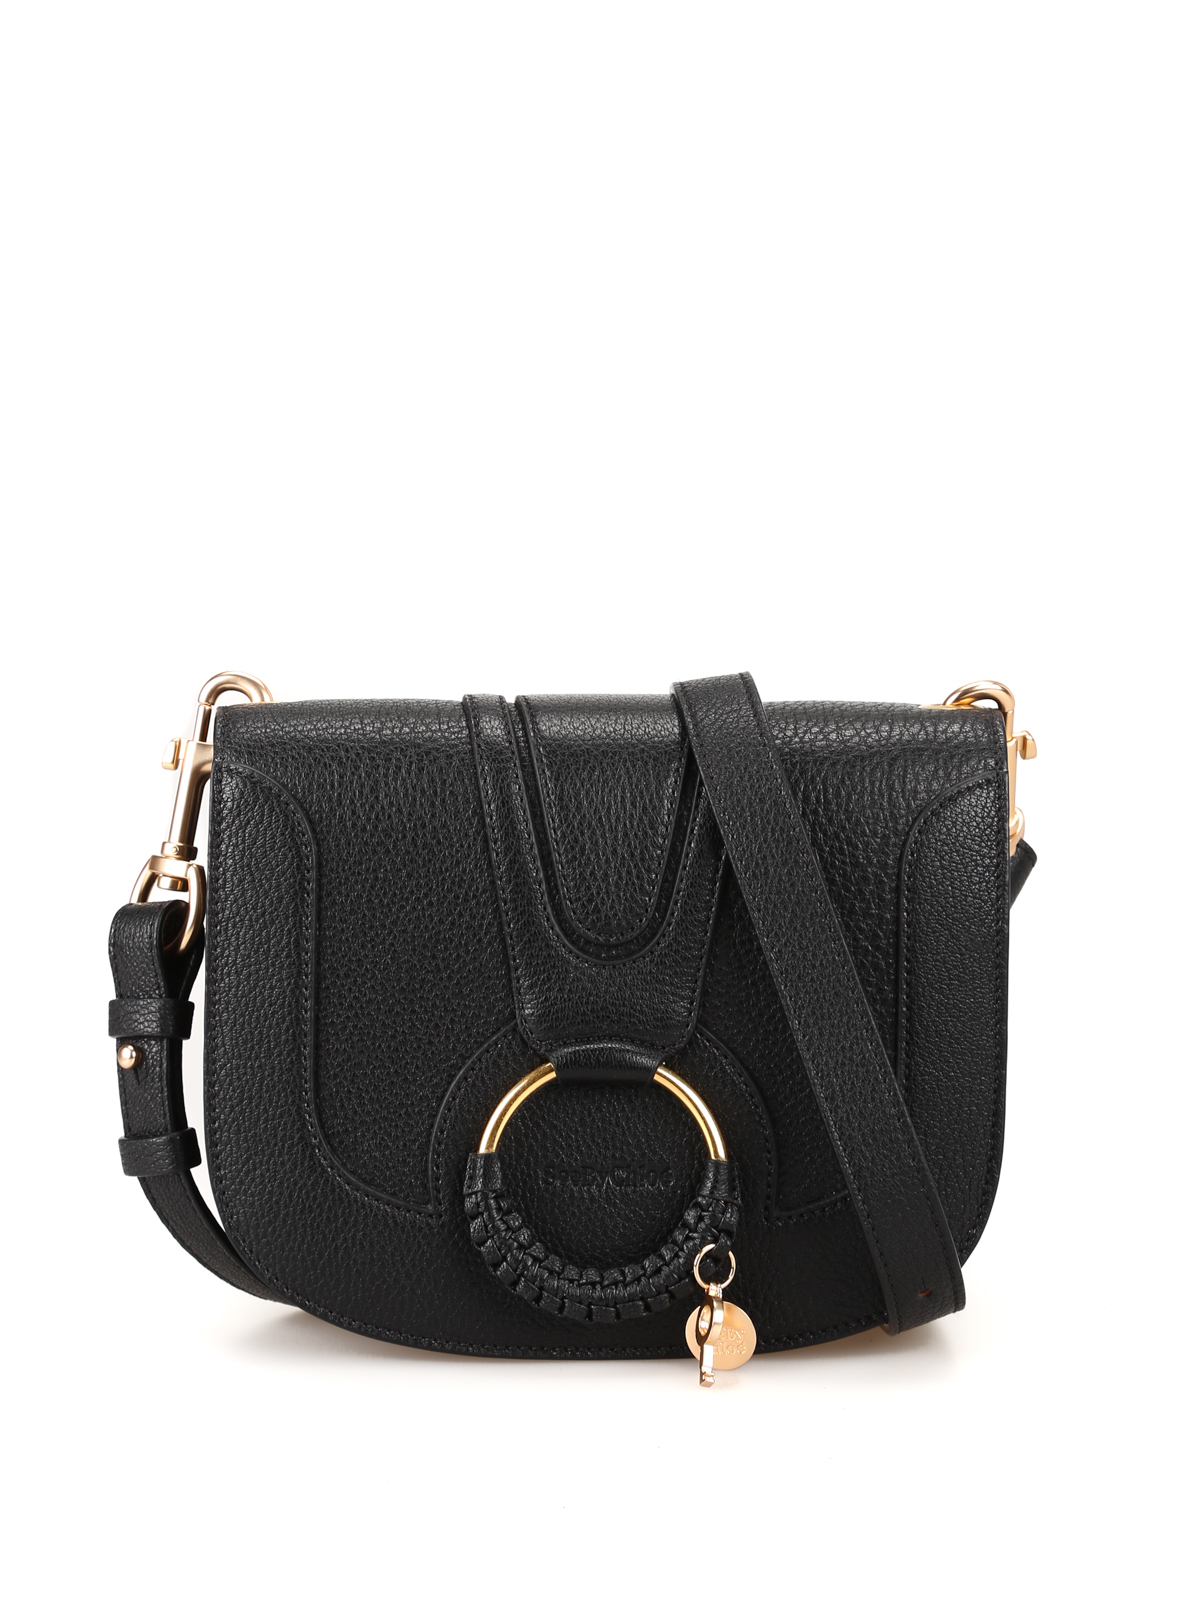 See By Chloé Hana Grained Leather Bag In Negro